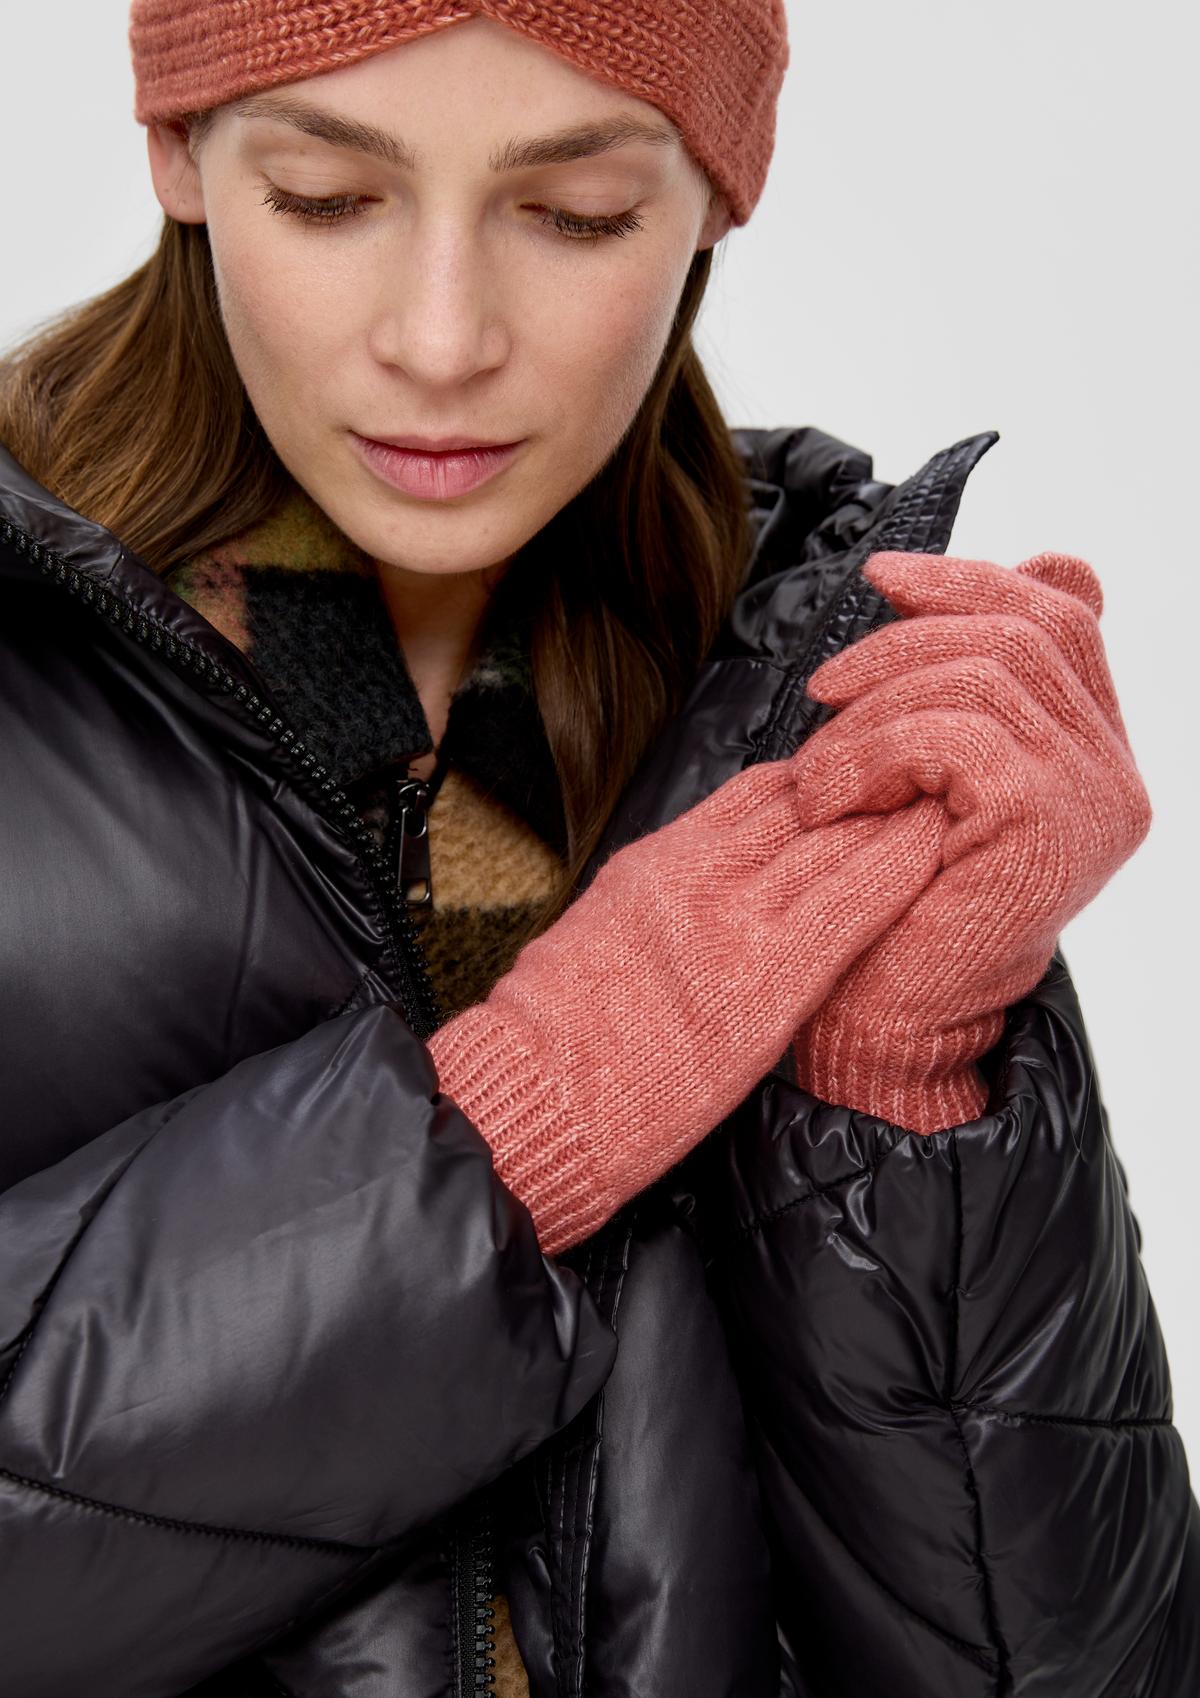 s.Oliver Knitted gloves with wool